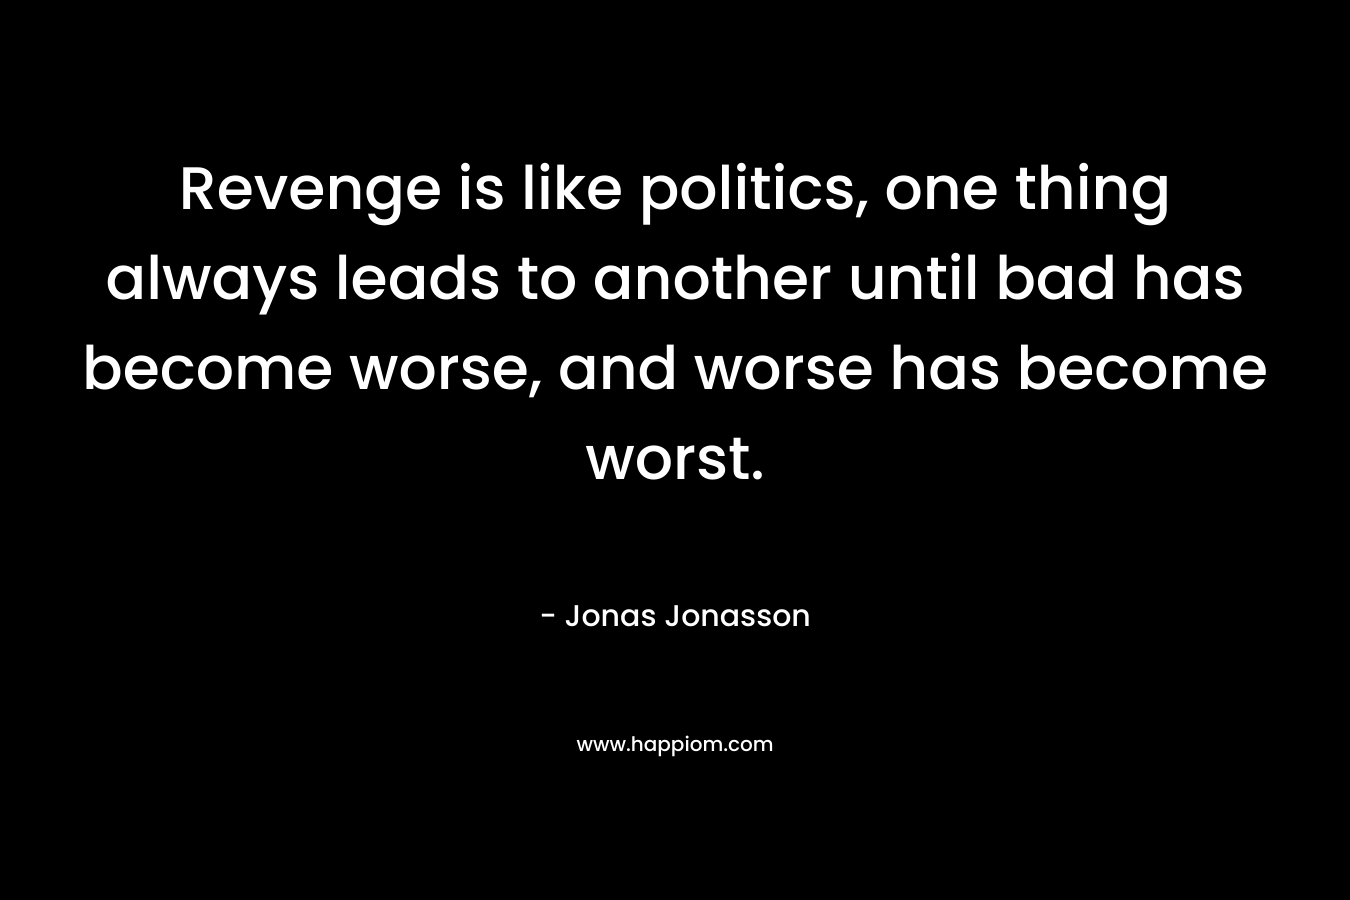 Revenge is like politics, one thing always leads to another until bad has become worse, and worse has become worst.